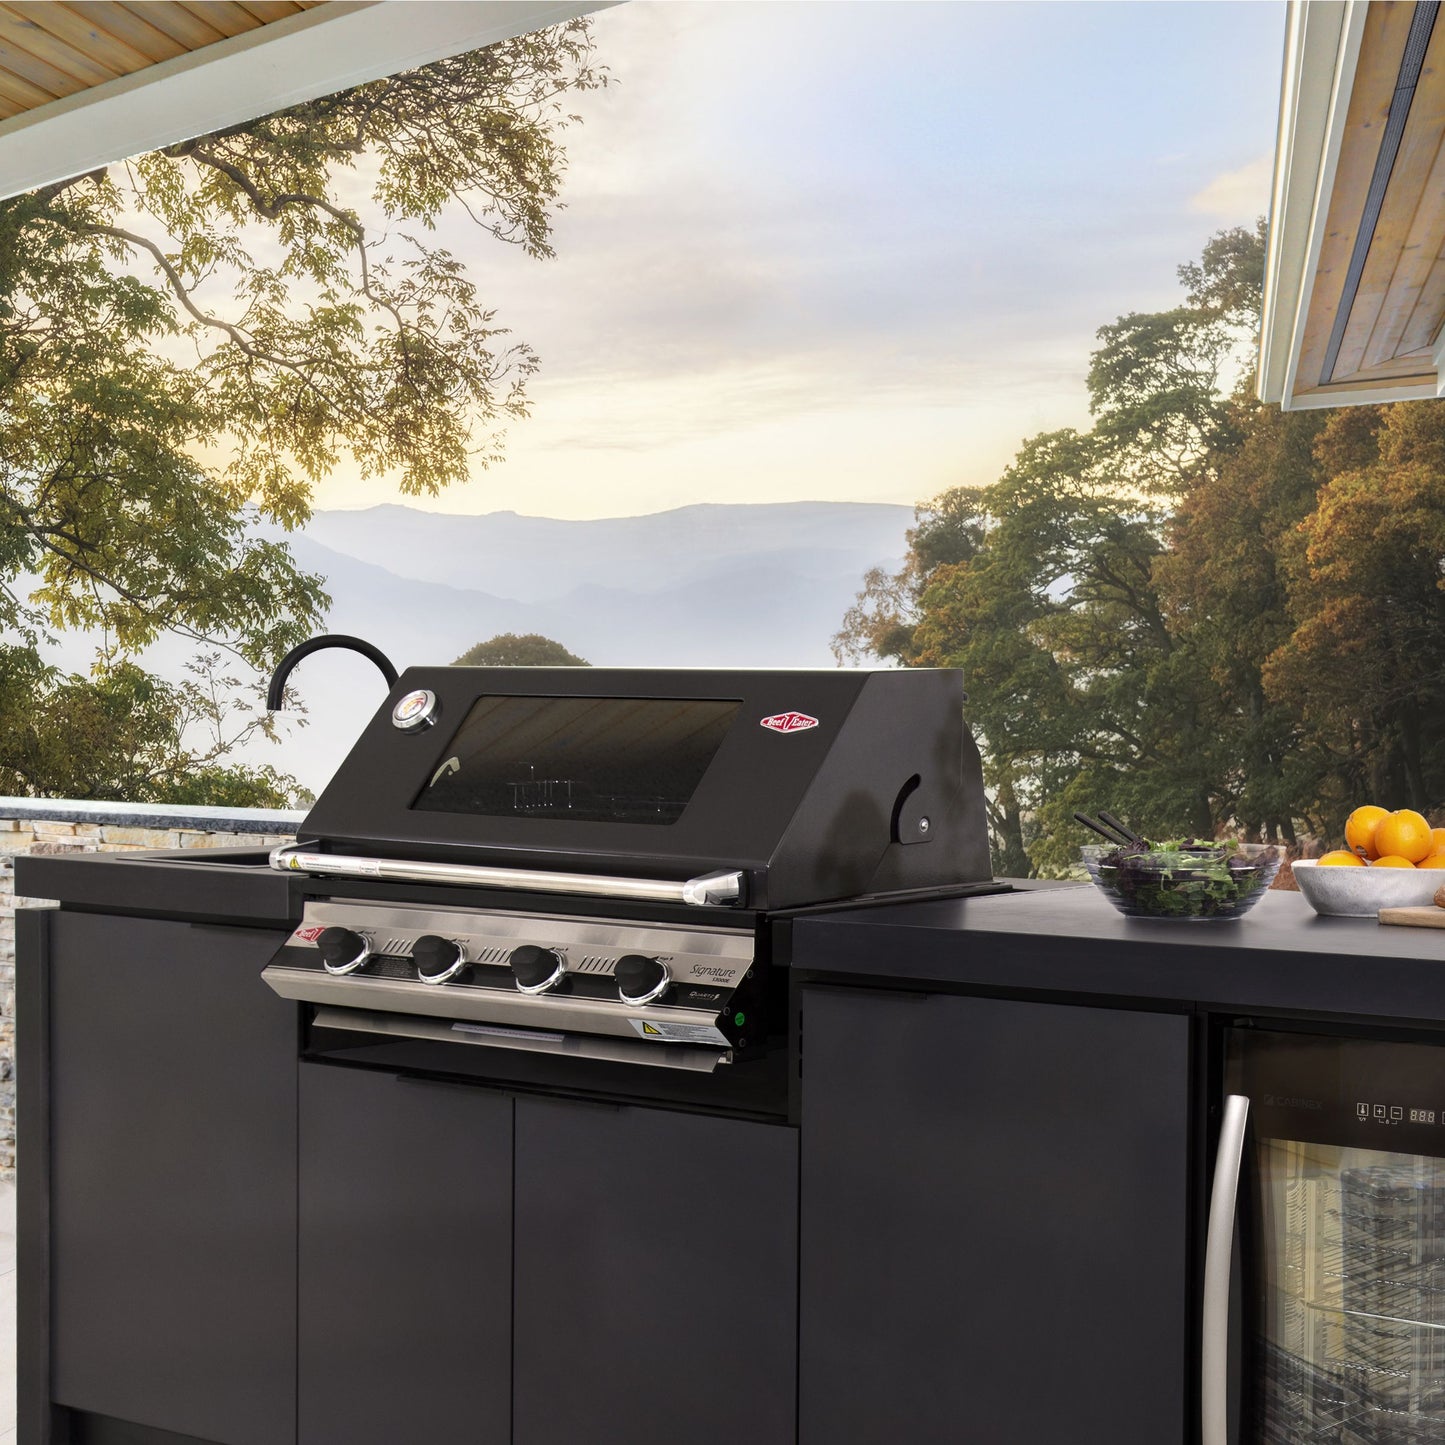 Cabinex Classic with BeefEater 4 Burner with fridgeCabinex Classic with BeefEater 4 Burner 3000E BBQ with fridge